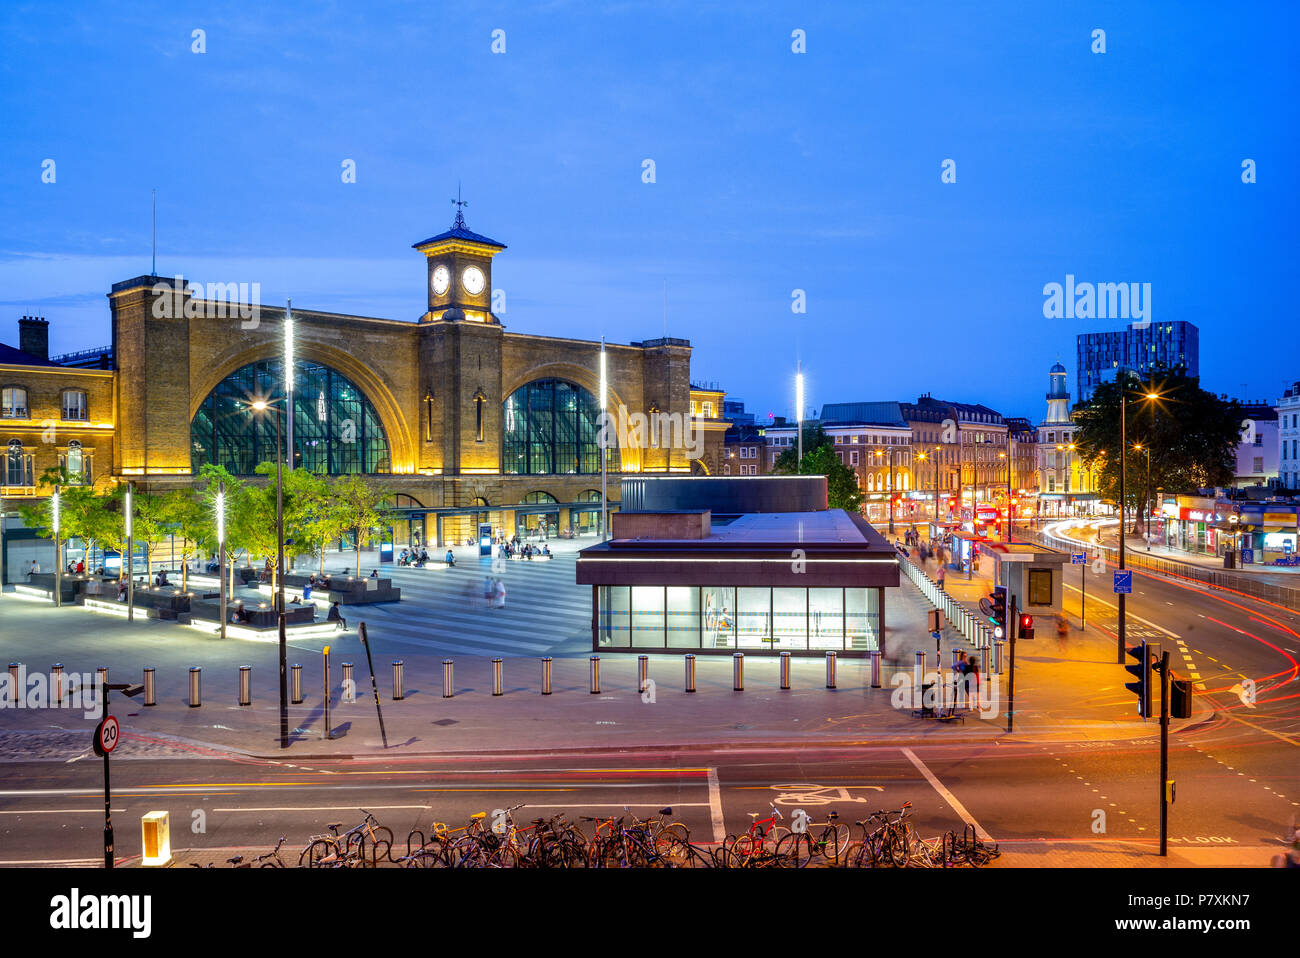 night view of king cross station in london, uk Stock Photo